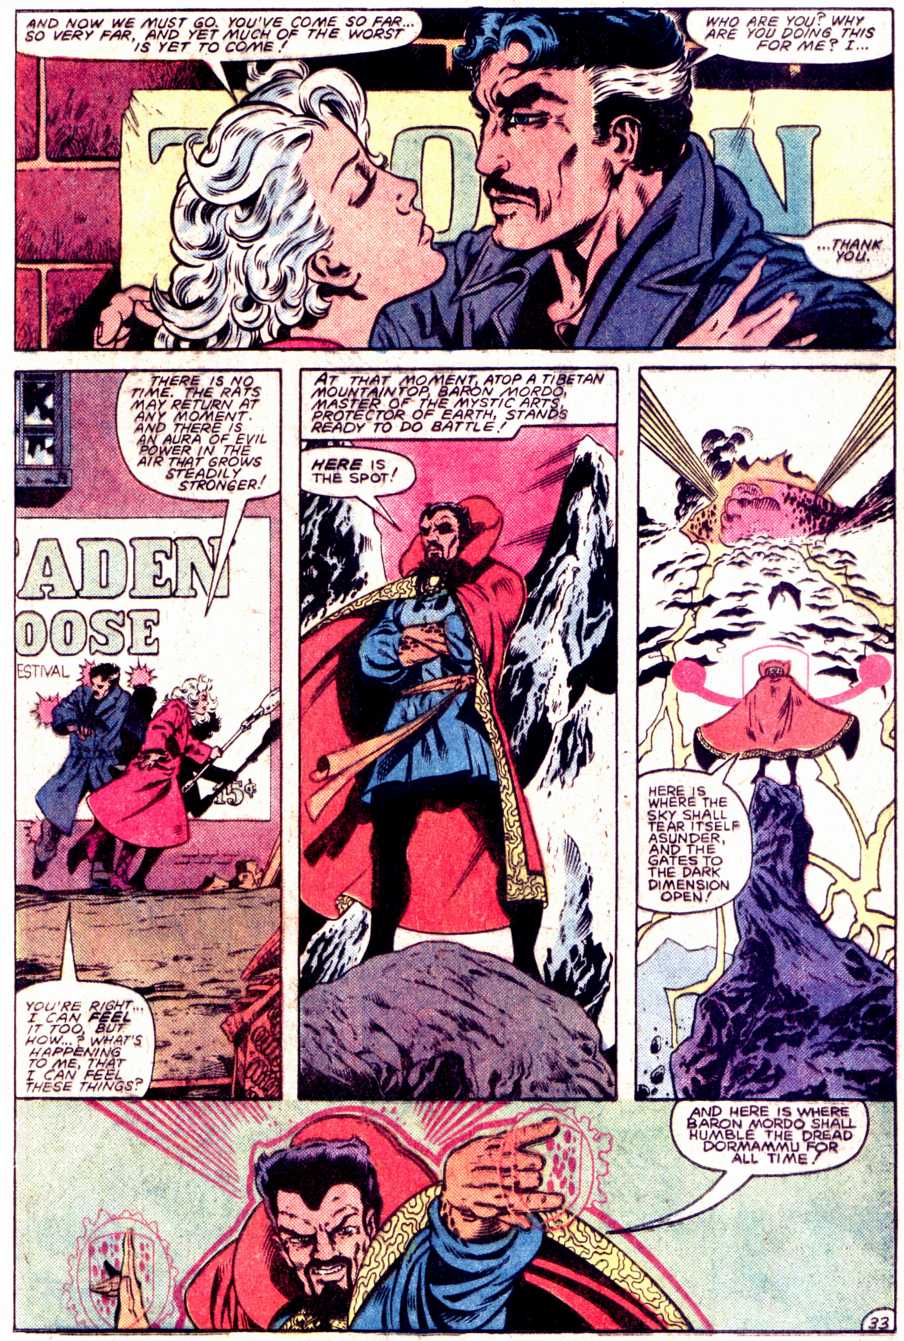 What If? (1977) issue 40 - Dr Strange had not become master of The mystic arts - Page 34